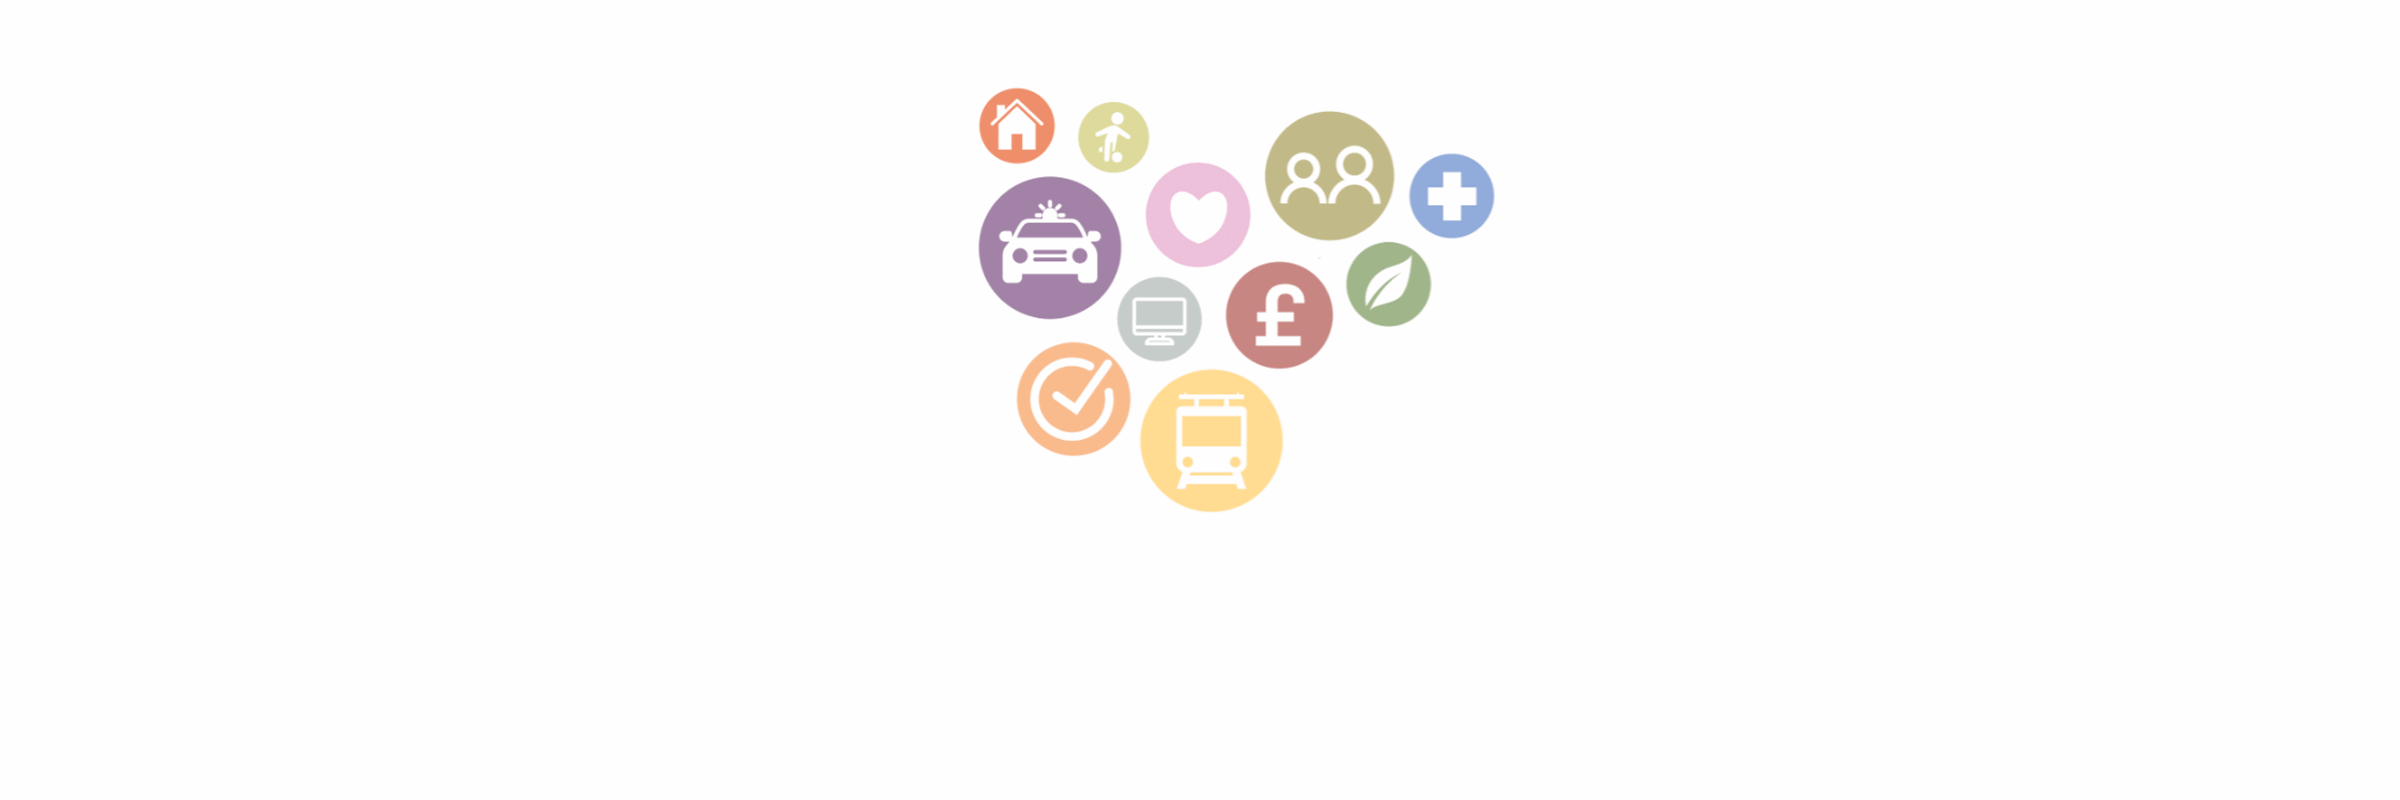 Icons representing different topics to talk about, e.g. transport, police, crime, health, digital, and communities